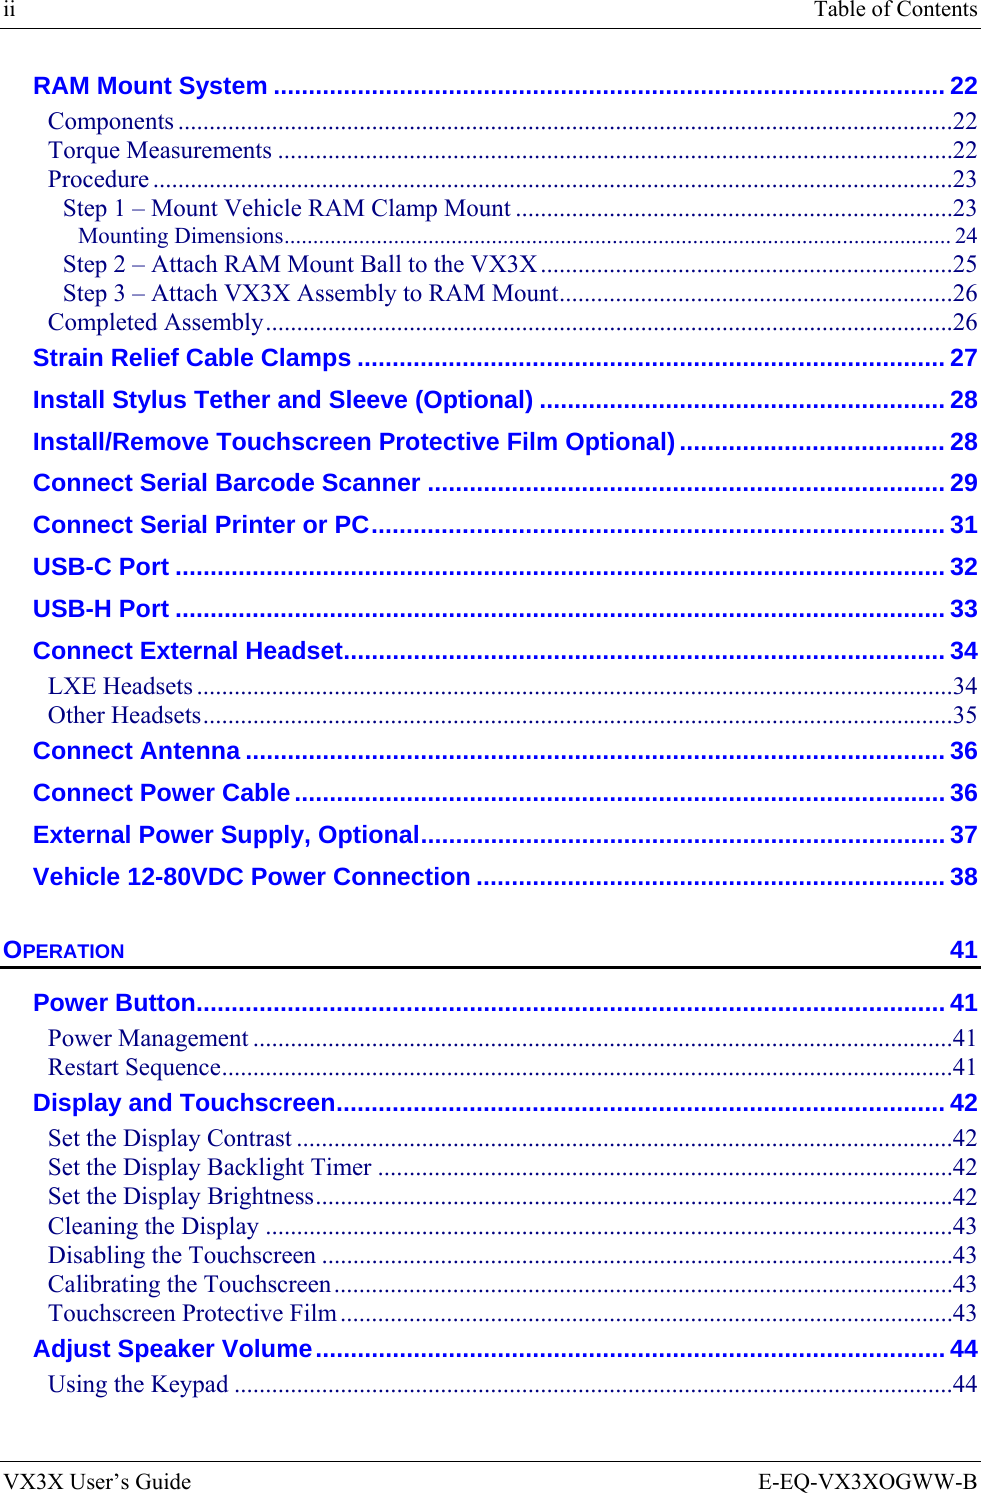 ii  Table of Contents VX3X User’s Guide  E-EQ-VX3XOGWW-B RAM Mount System ................................................................................................ 22 Components ............................................................................................................................22 Torque Measurements ............................................................................................................22 Procedure ................................................................................................................................23 Step 1 – Mount Vehicle RAM Clamp Mount ......................................................................23 Mounting Dimensions.................................................................................................................... 24 Step 2 – Attach RAM Mount Ball to the VX3X ..................................................................25 Step 3 – Attach VX3X Assembly to RAM Mount...............................................................26 Completed Assembly..............................................................................................................26 Strain Relief Cable Clamps .................................................................................... 27 Install Stylus Tether and Sleeve (Optional) .......................................................... 28 Install/Remove Touchscreen Protective Film Optional)...................................... 28 Connect Serial Barcode Scanner .......................................................................... 29 Connect Serial Printer or PC.................................................................................. 31 USB-C Port .............................................................................................................. 32 USB-H Port .............................................................................................................. 33 Connect External Headset...................................................................................... 34 LXE Headsets .........................................................................................................................34 Other Headsets........................................................................................................................35 Connect Antenna .................................................................................................... 36 Connect Power Cable............................................................................................. 36 External Power Supply, Optional........................................................................... 37 Vehicle 12-80VDC Power Connection ................................................................... 38 OPERATION 41 Power Button........................................................................................................... 41 Power Management ................................................................................................................41 Restart Sequence.....................................................................................................................41 Display and Touchscreen....................................................................................... 42 Set the Display Contrast .........................................................................................................42 Set the Display Backlight Timer ............................................................................................42 Set the Display Brightness......................................................................................................42 Cleaning the Display ..............................................................................................................43 Disabling the Touchscreen .....................................................................................................43 Calibrating the Touchscreen...................................................................................................43 Touchscreen Protective Film ..................................................................................................43 Adjust Speaker Volume.......................................................................................... 44 Using the Keypad ...................................................................................................................44 